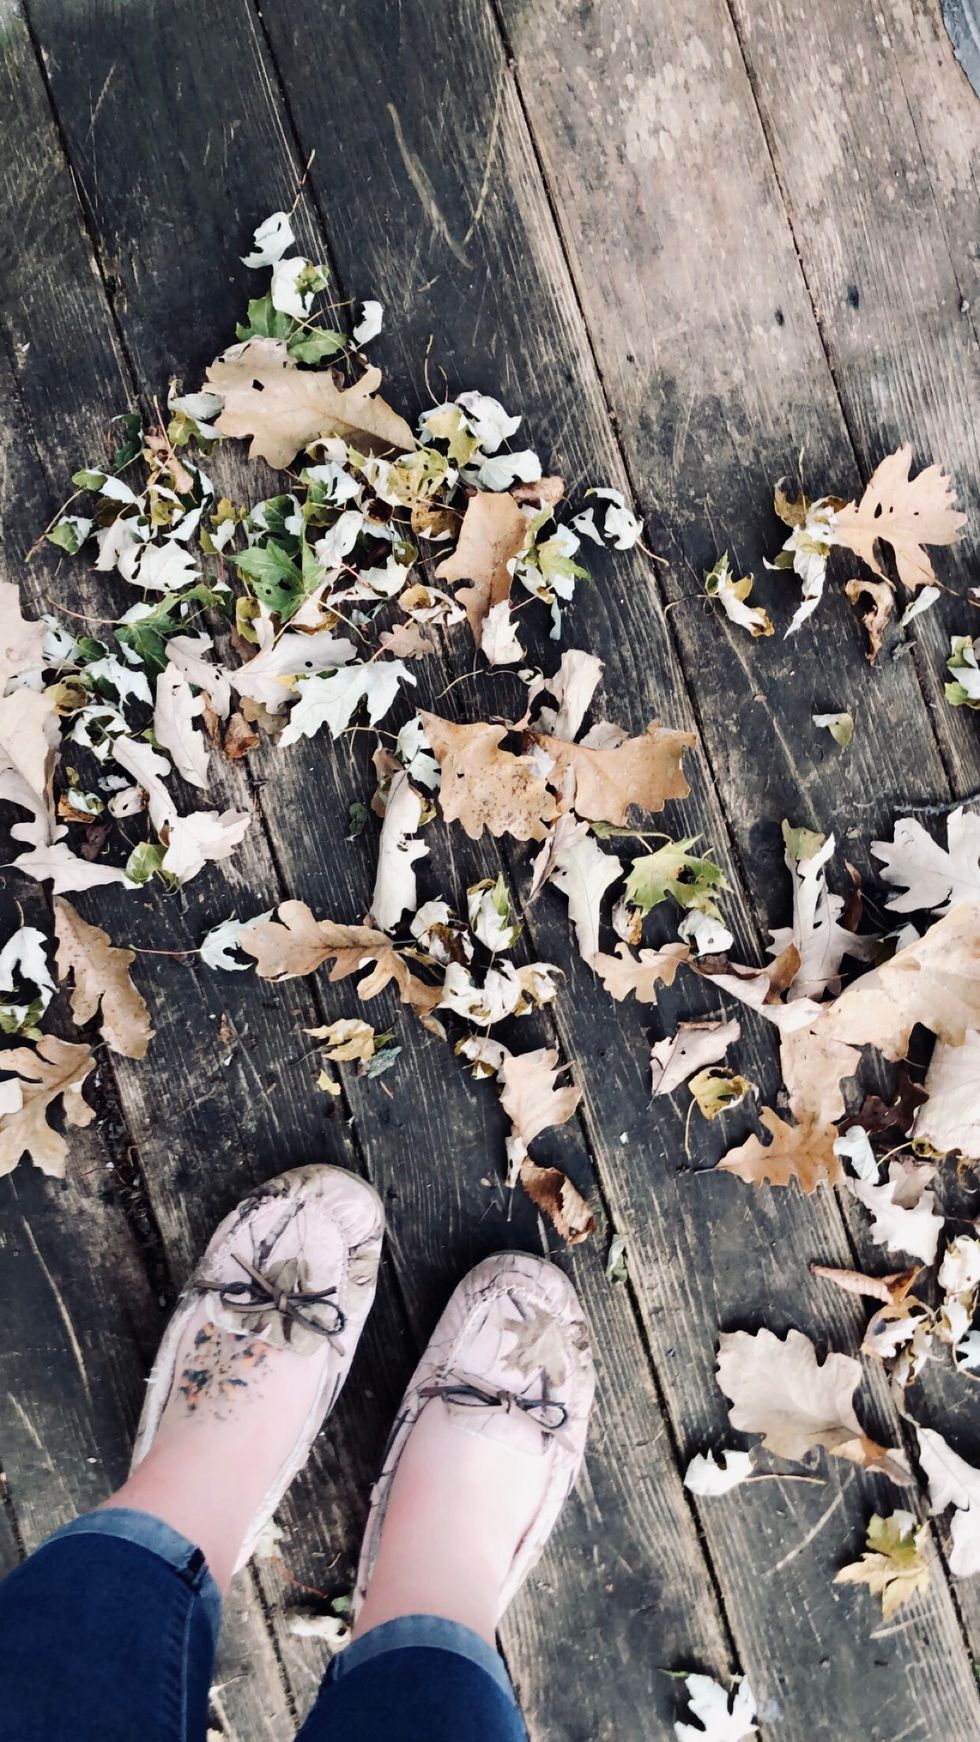 Poetry On Odyssey: Rotting Wood And Dead Leaves